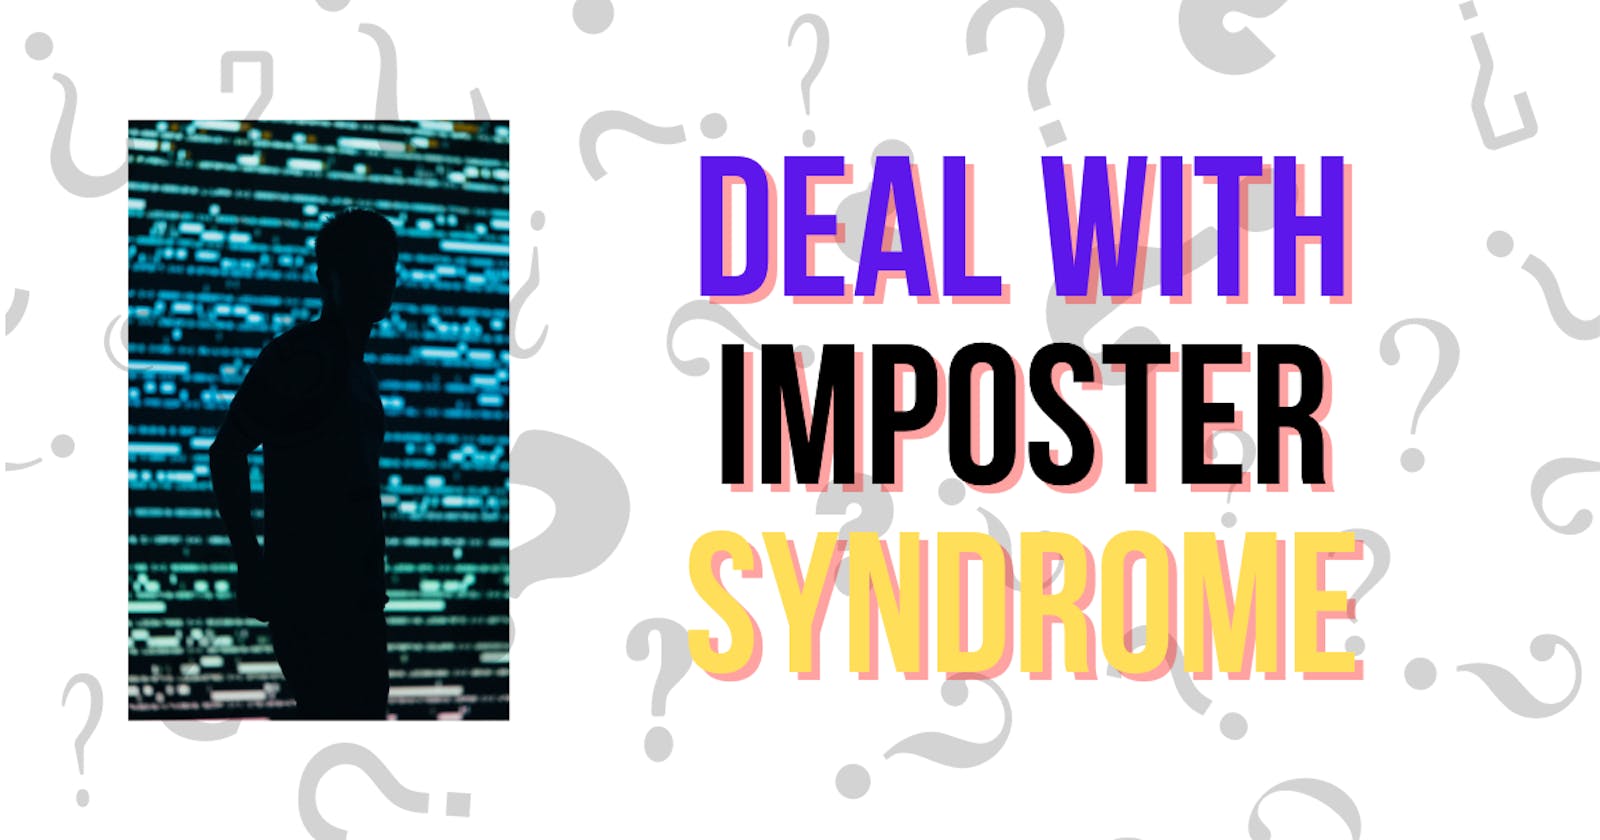 Overcoming the Imposter Syndrome